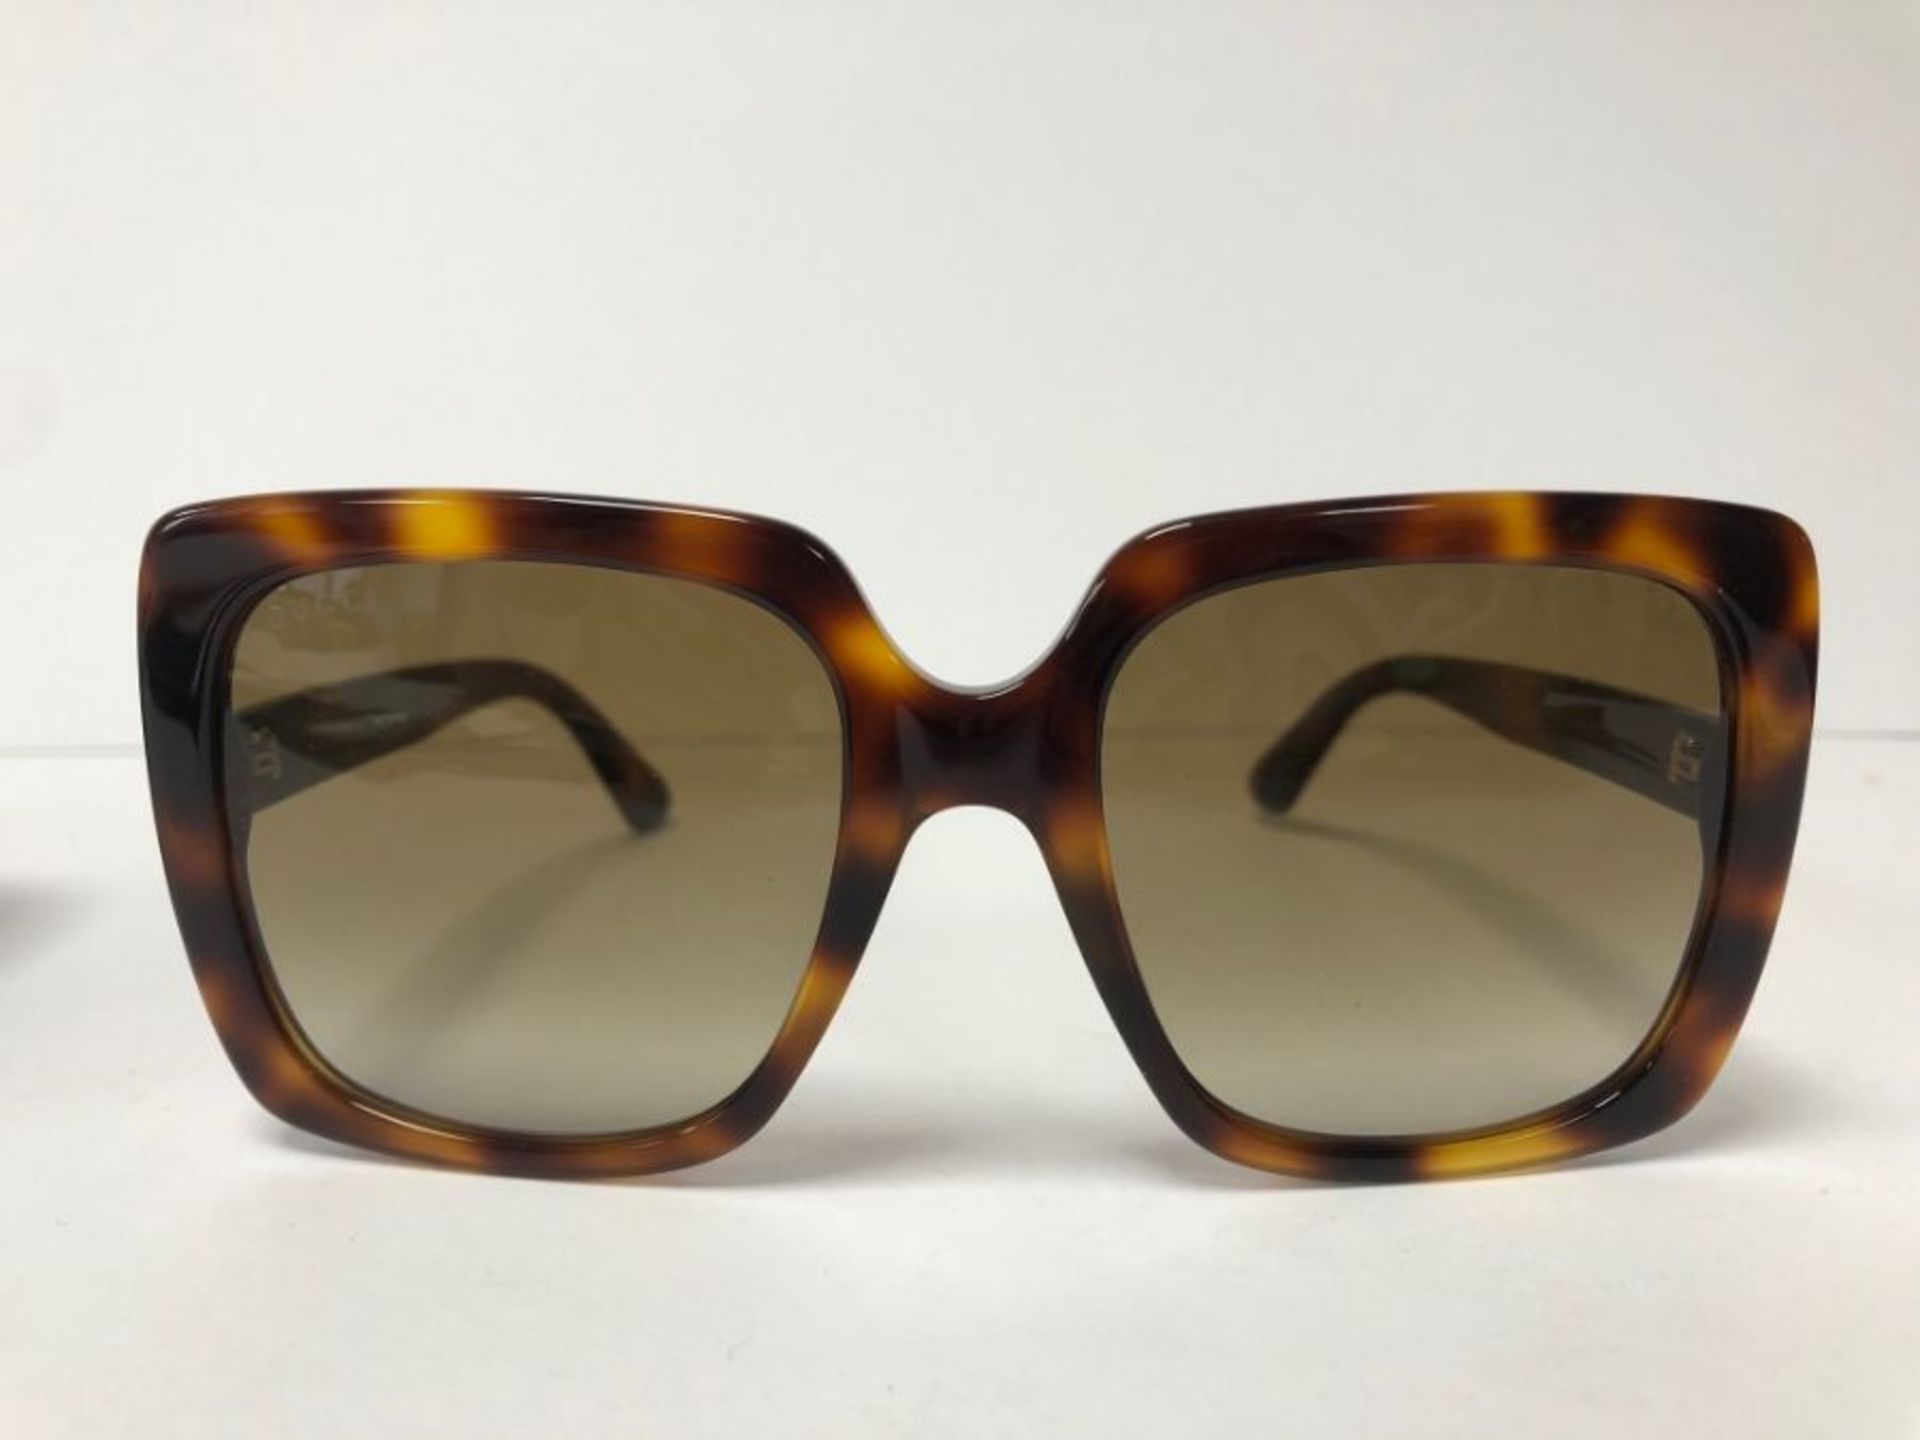 Gucci Men's Sunglasses, Mens, GG0689S Tortoise Shell with case - Image 5 of 7